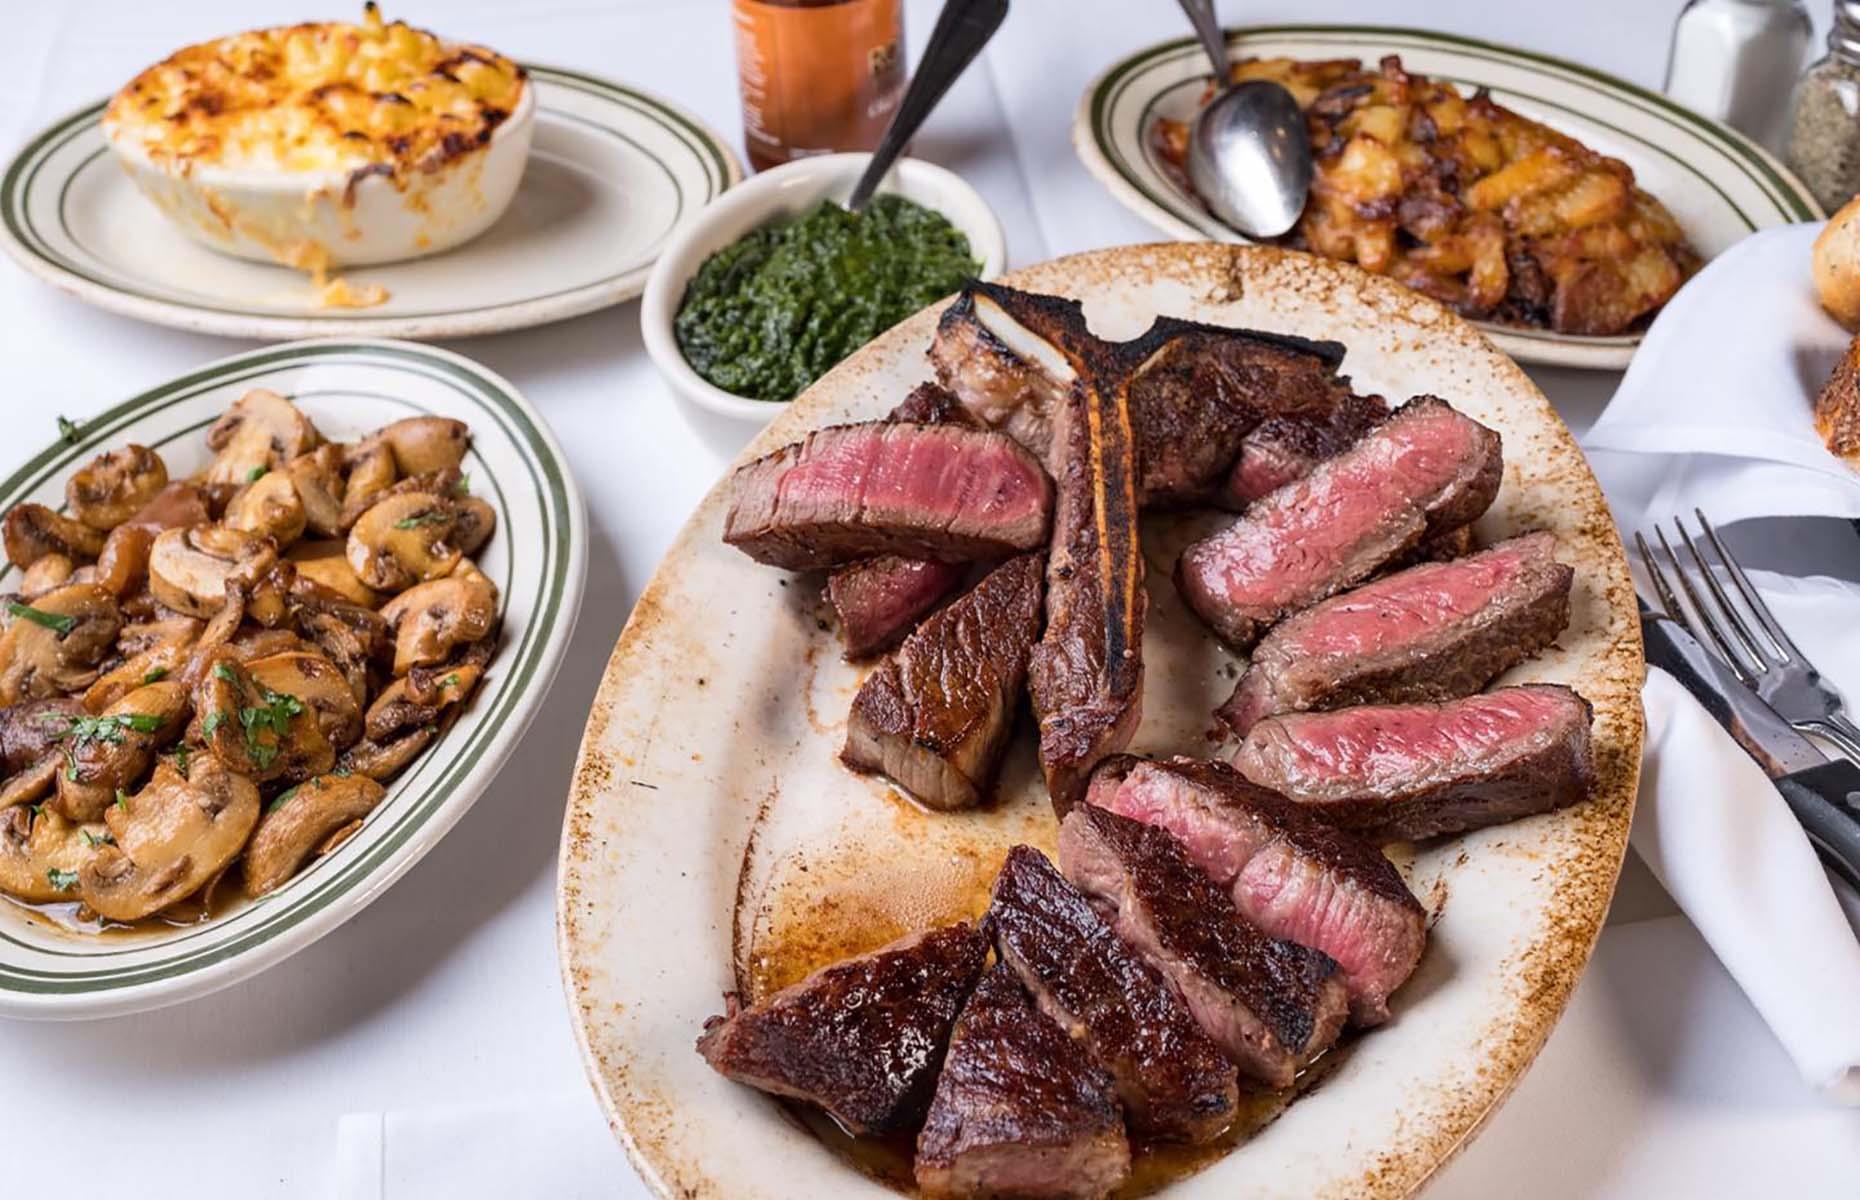 <p><a href="https://www.roccosteakhouse.com/">This exclusive steakhouse</a> is normally a treat to visit and food here is classic and faultlessly executed. Though on the pricey side, you can get first-rate porterhouse, rib-eye, sirloin, bone-in filet mignon and tomahawk steaks, all perfectly cooked and with tremendous flavor. <a href="https://www.yelp.com/biz/rocco-steakhouse-new-york">Customers also praise</a> the crab cakes on the appetizers menu (you'll also find lobster cocktail and sizzling Canadian bacon), while creamed spinach, mac 'n' cheese and jumbo baked potato are among the best sides to order.</p>